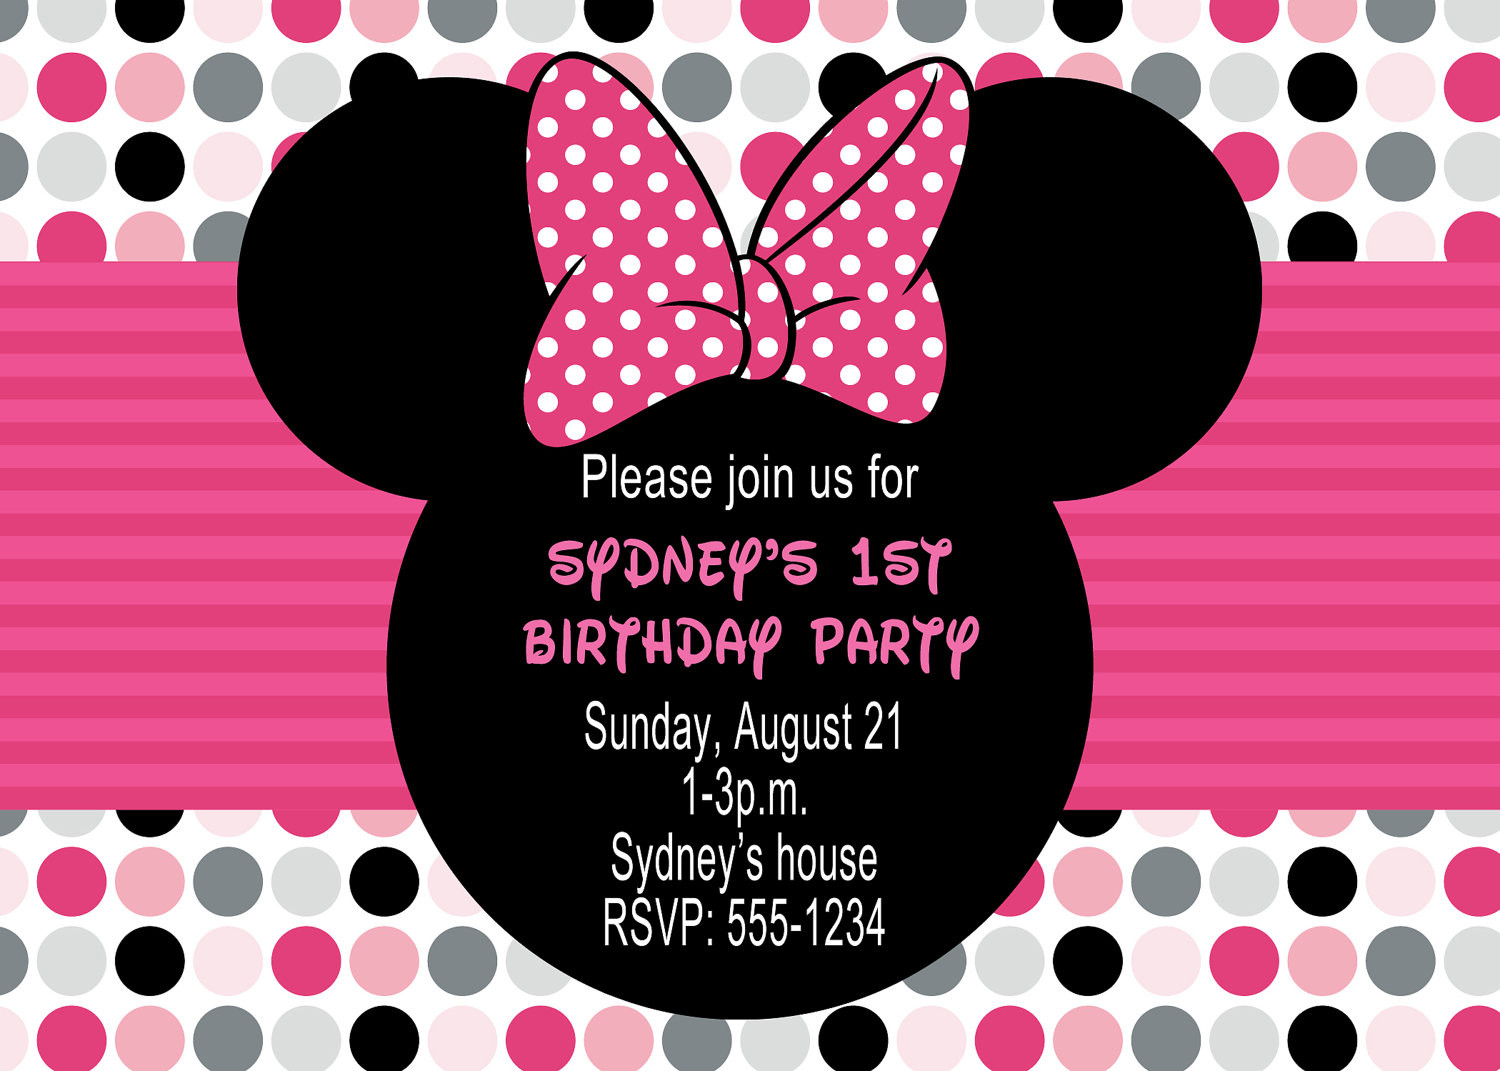 Minnie Mouse Birthday Invitations Personalized
 Minnie Mouse Birthday Party Invitations